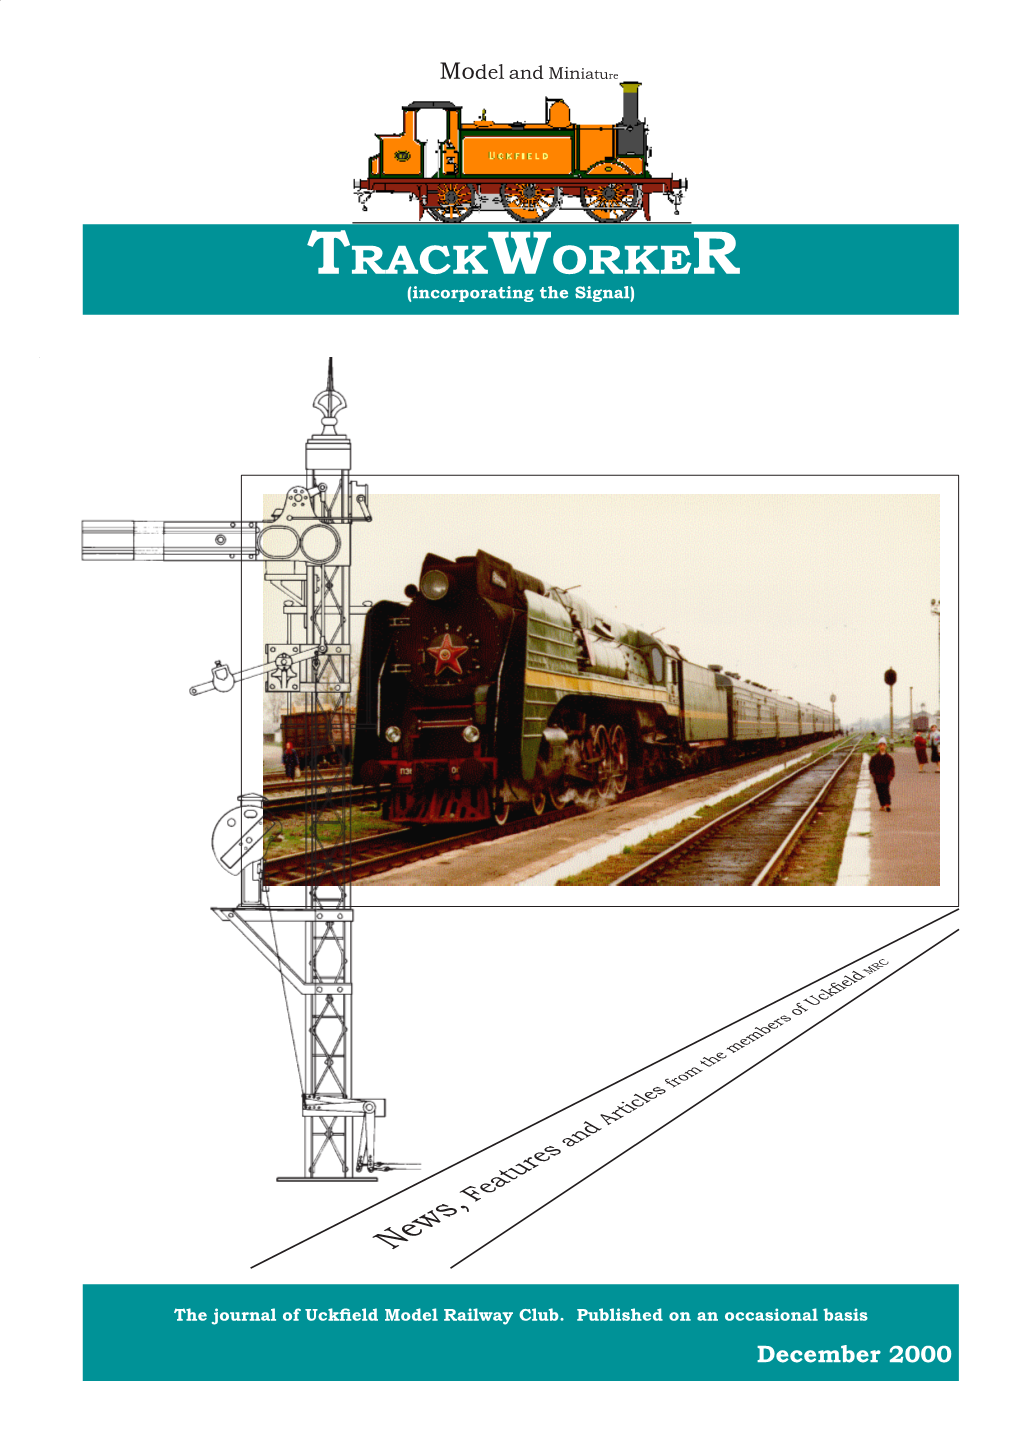 TRACKWORKER (Incorporating the Signal)